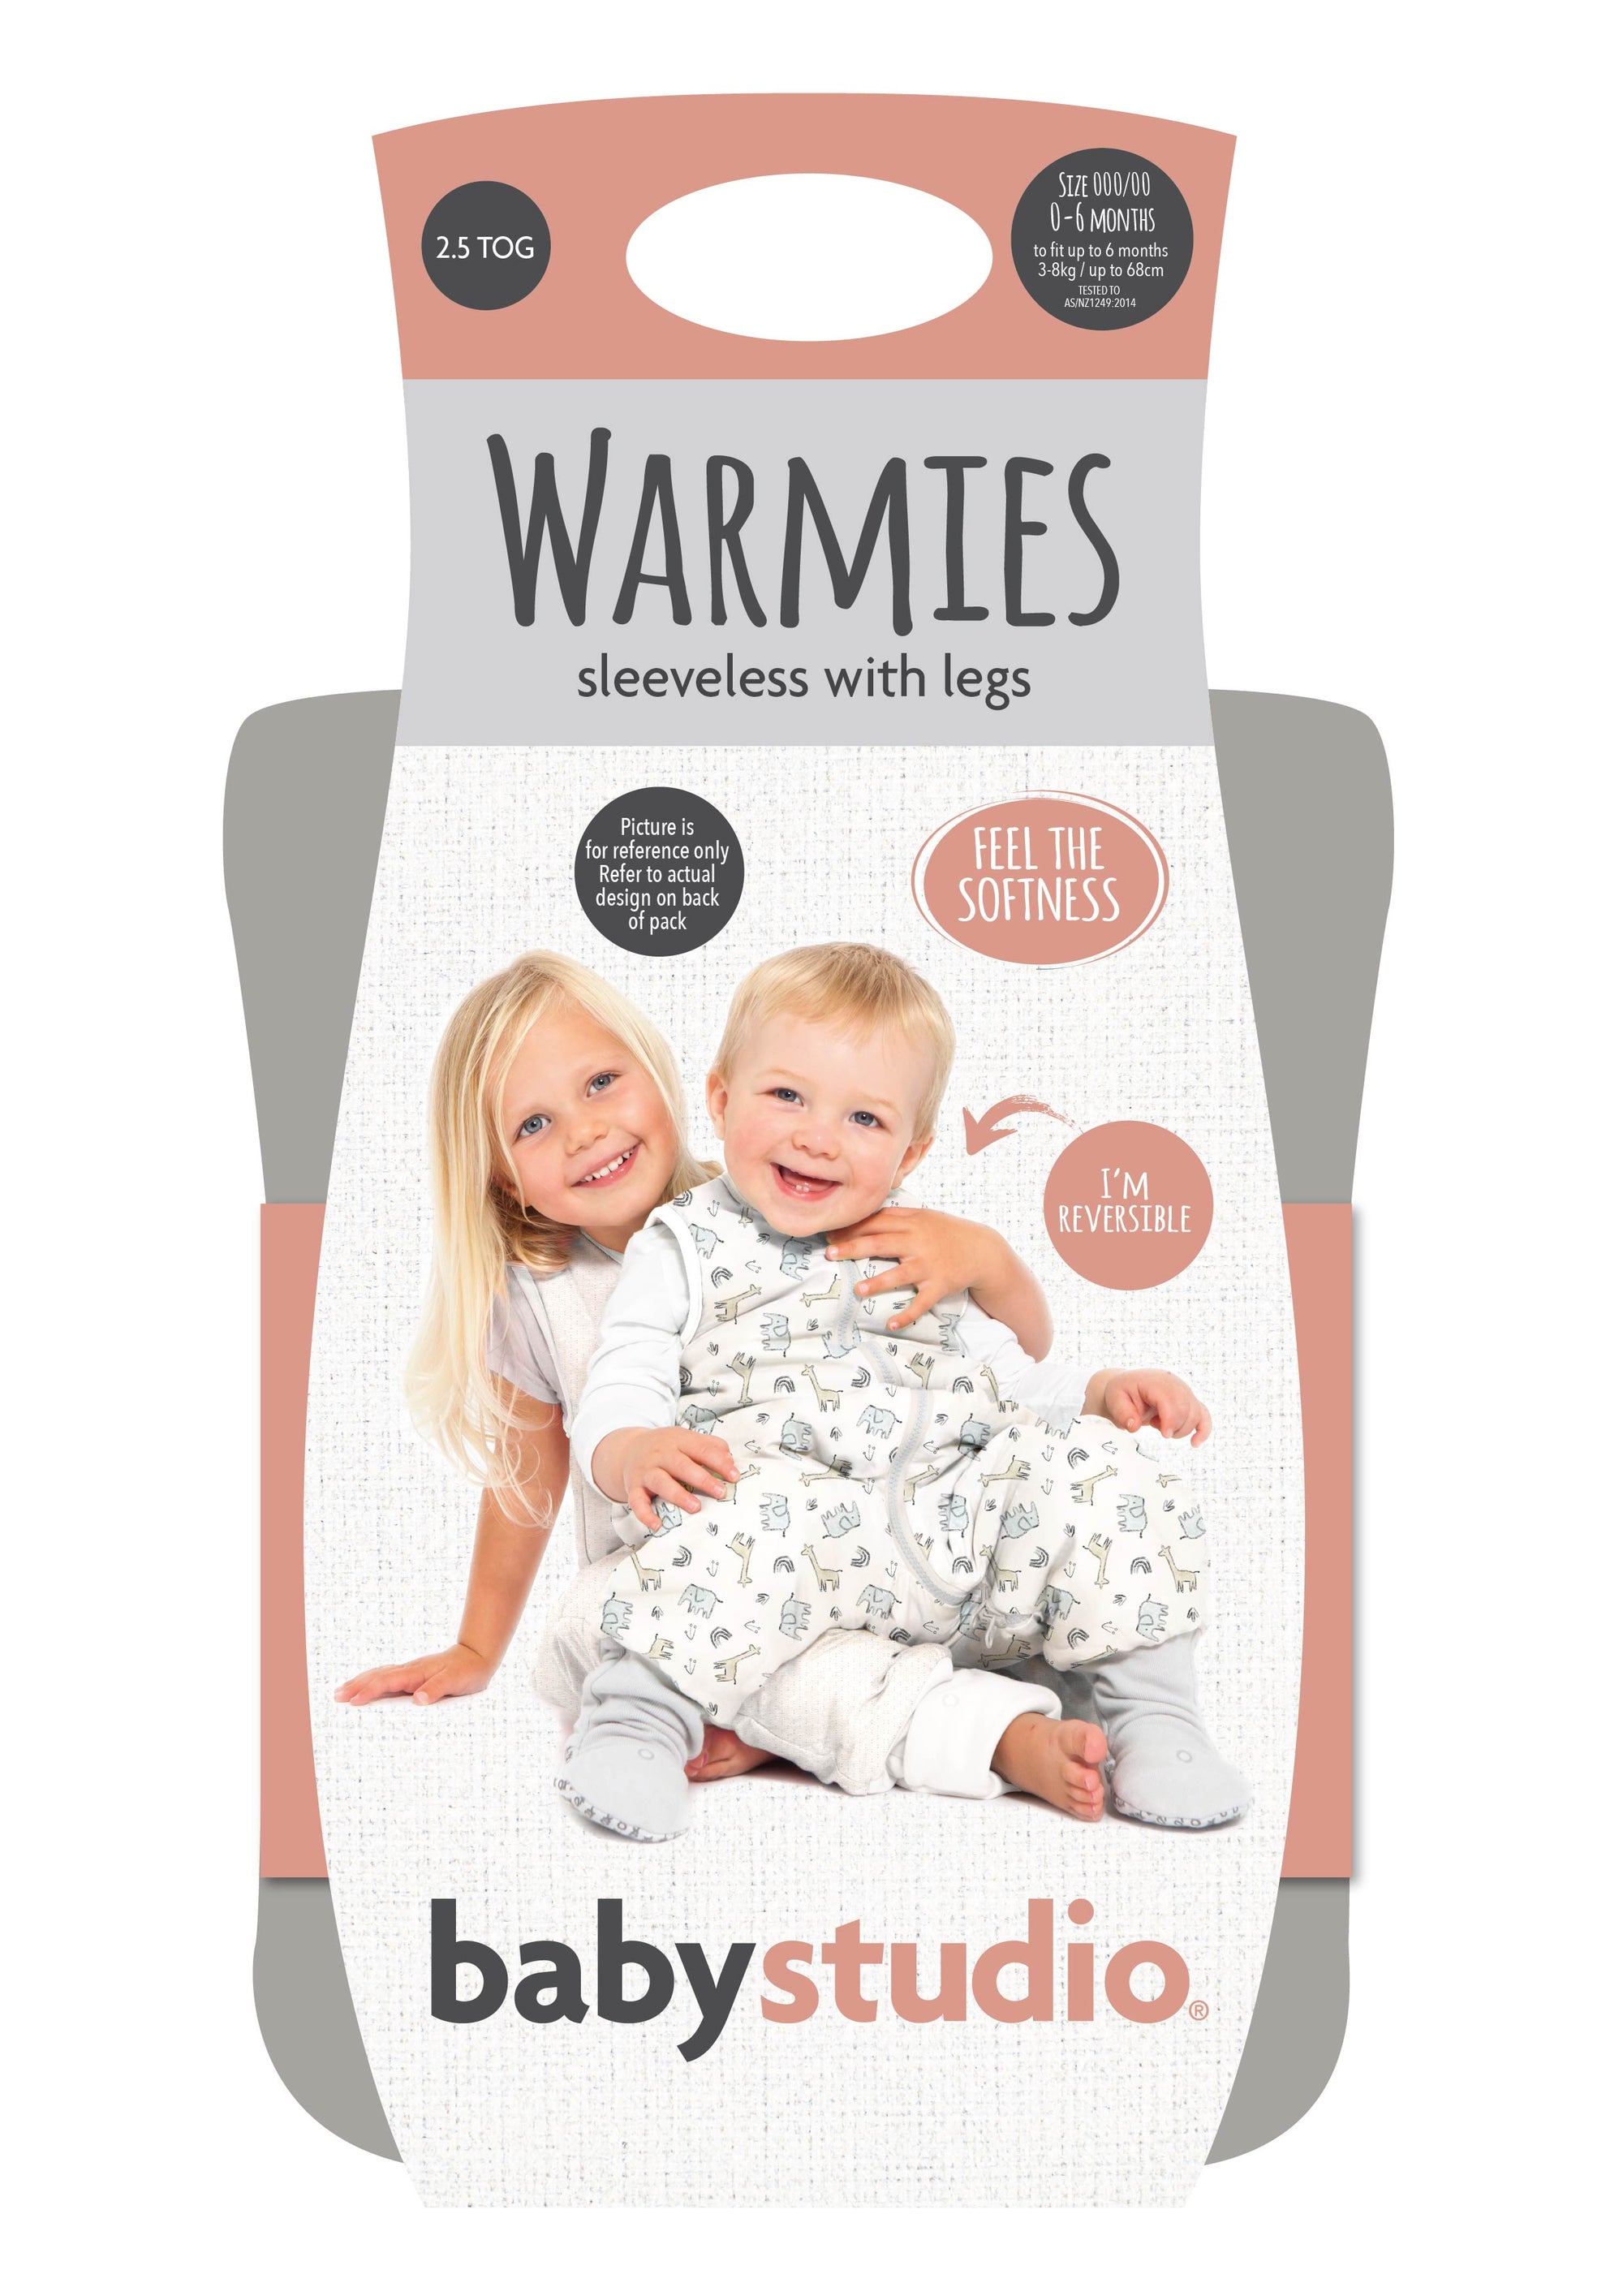 warmies cotton sleeveless with legs 2.5 TOG - oatmeal/rumble jungle